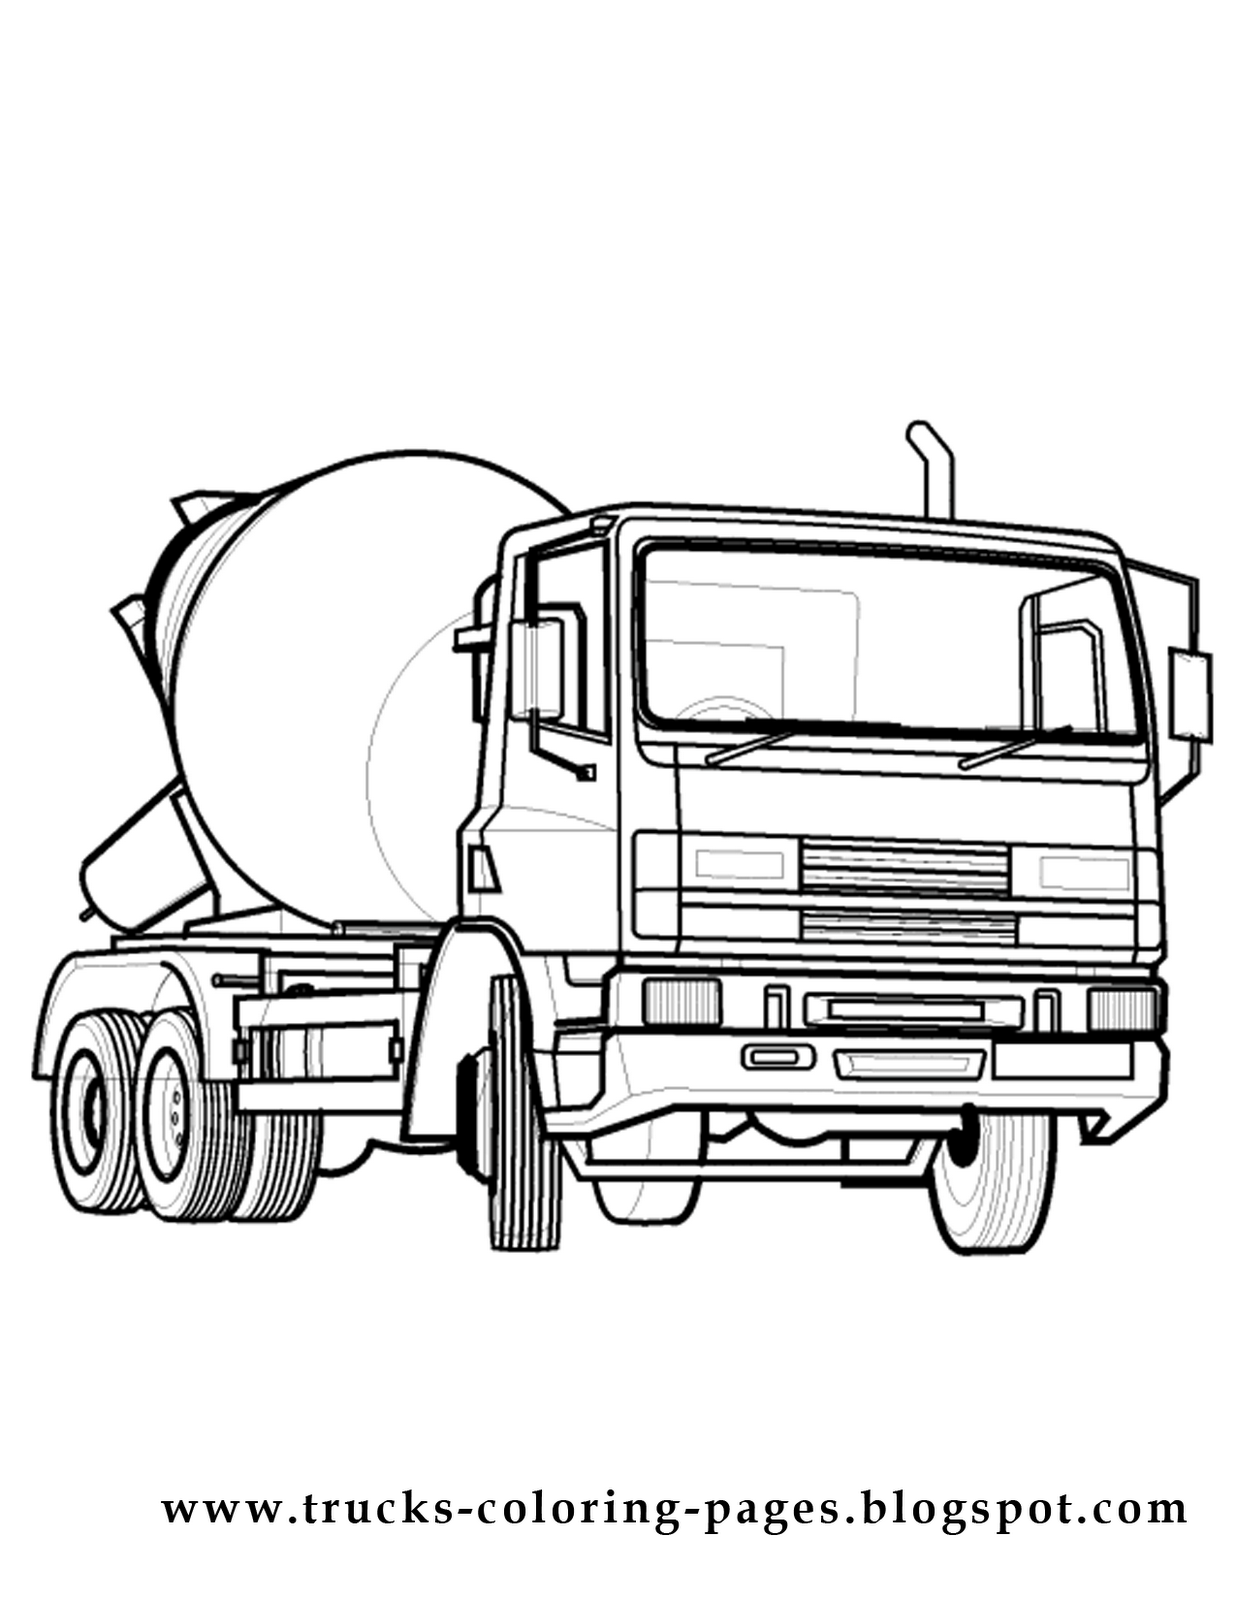 Printable coloring pages of cars and trucks image truck coloring pages cars coloring pages monster truck coloring pages